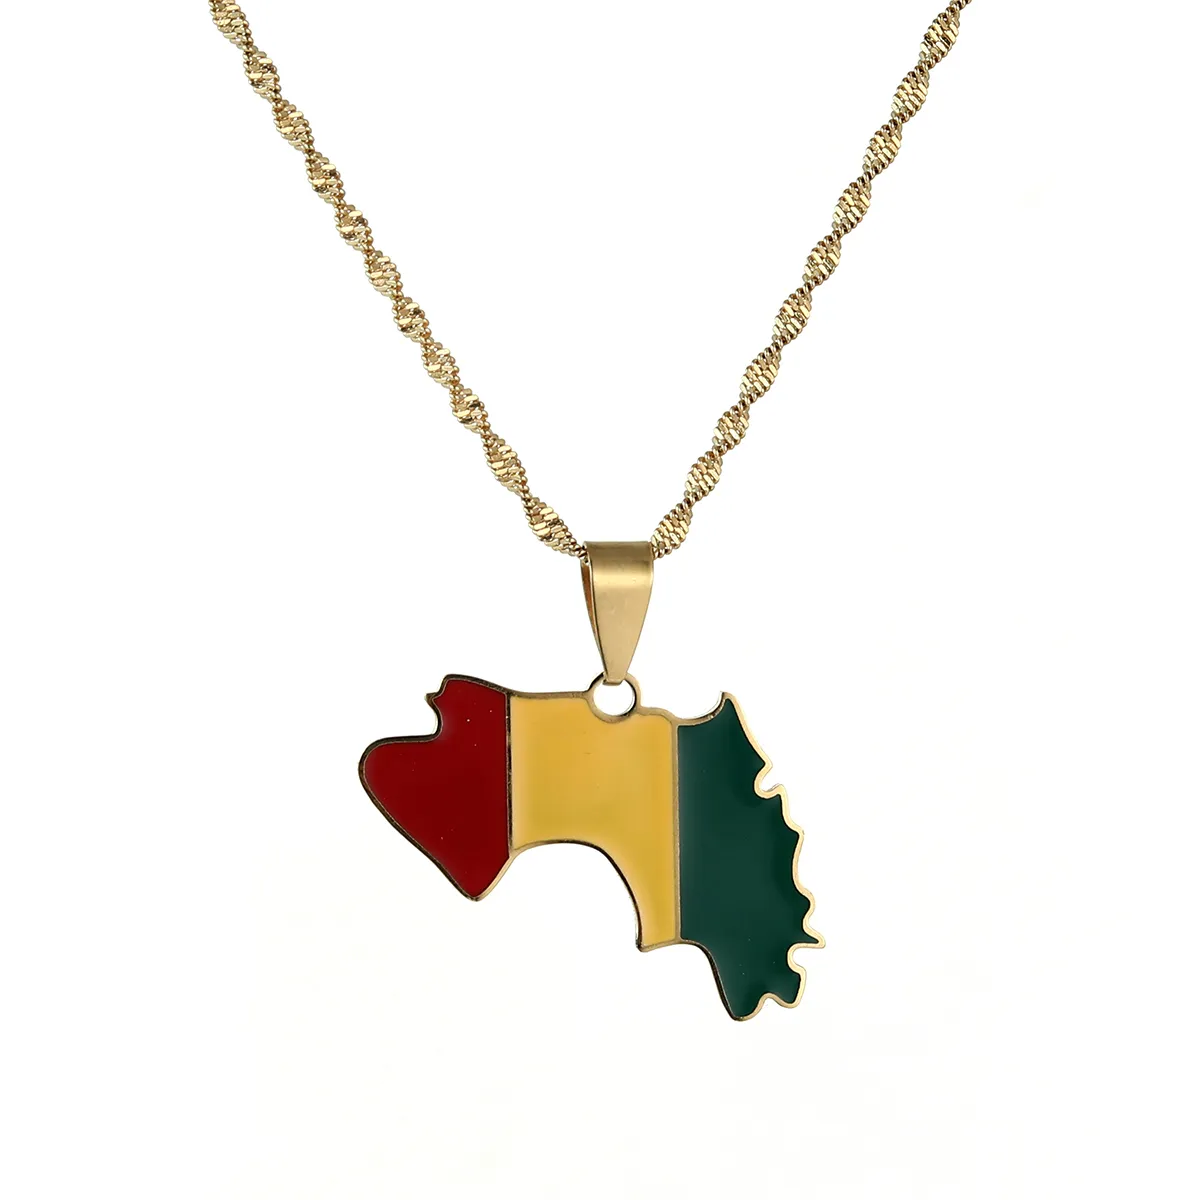 Stainless Steel Guinea Map Guinee Flag Pendant Maps Of Guinea Necklaces For Women Men Country Jewelry